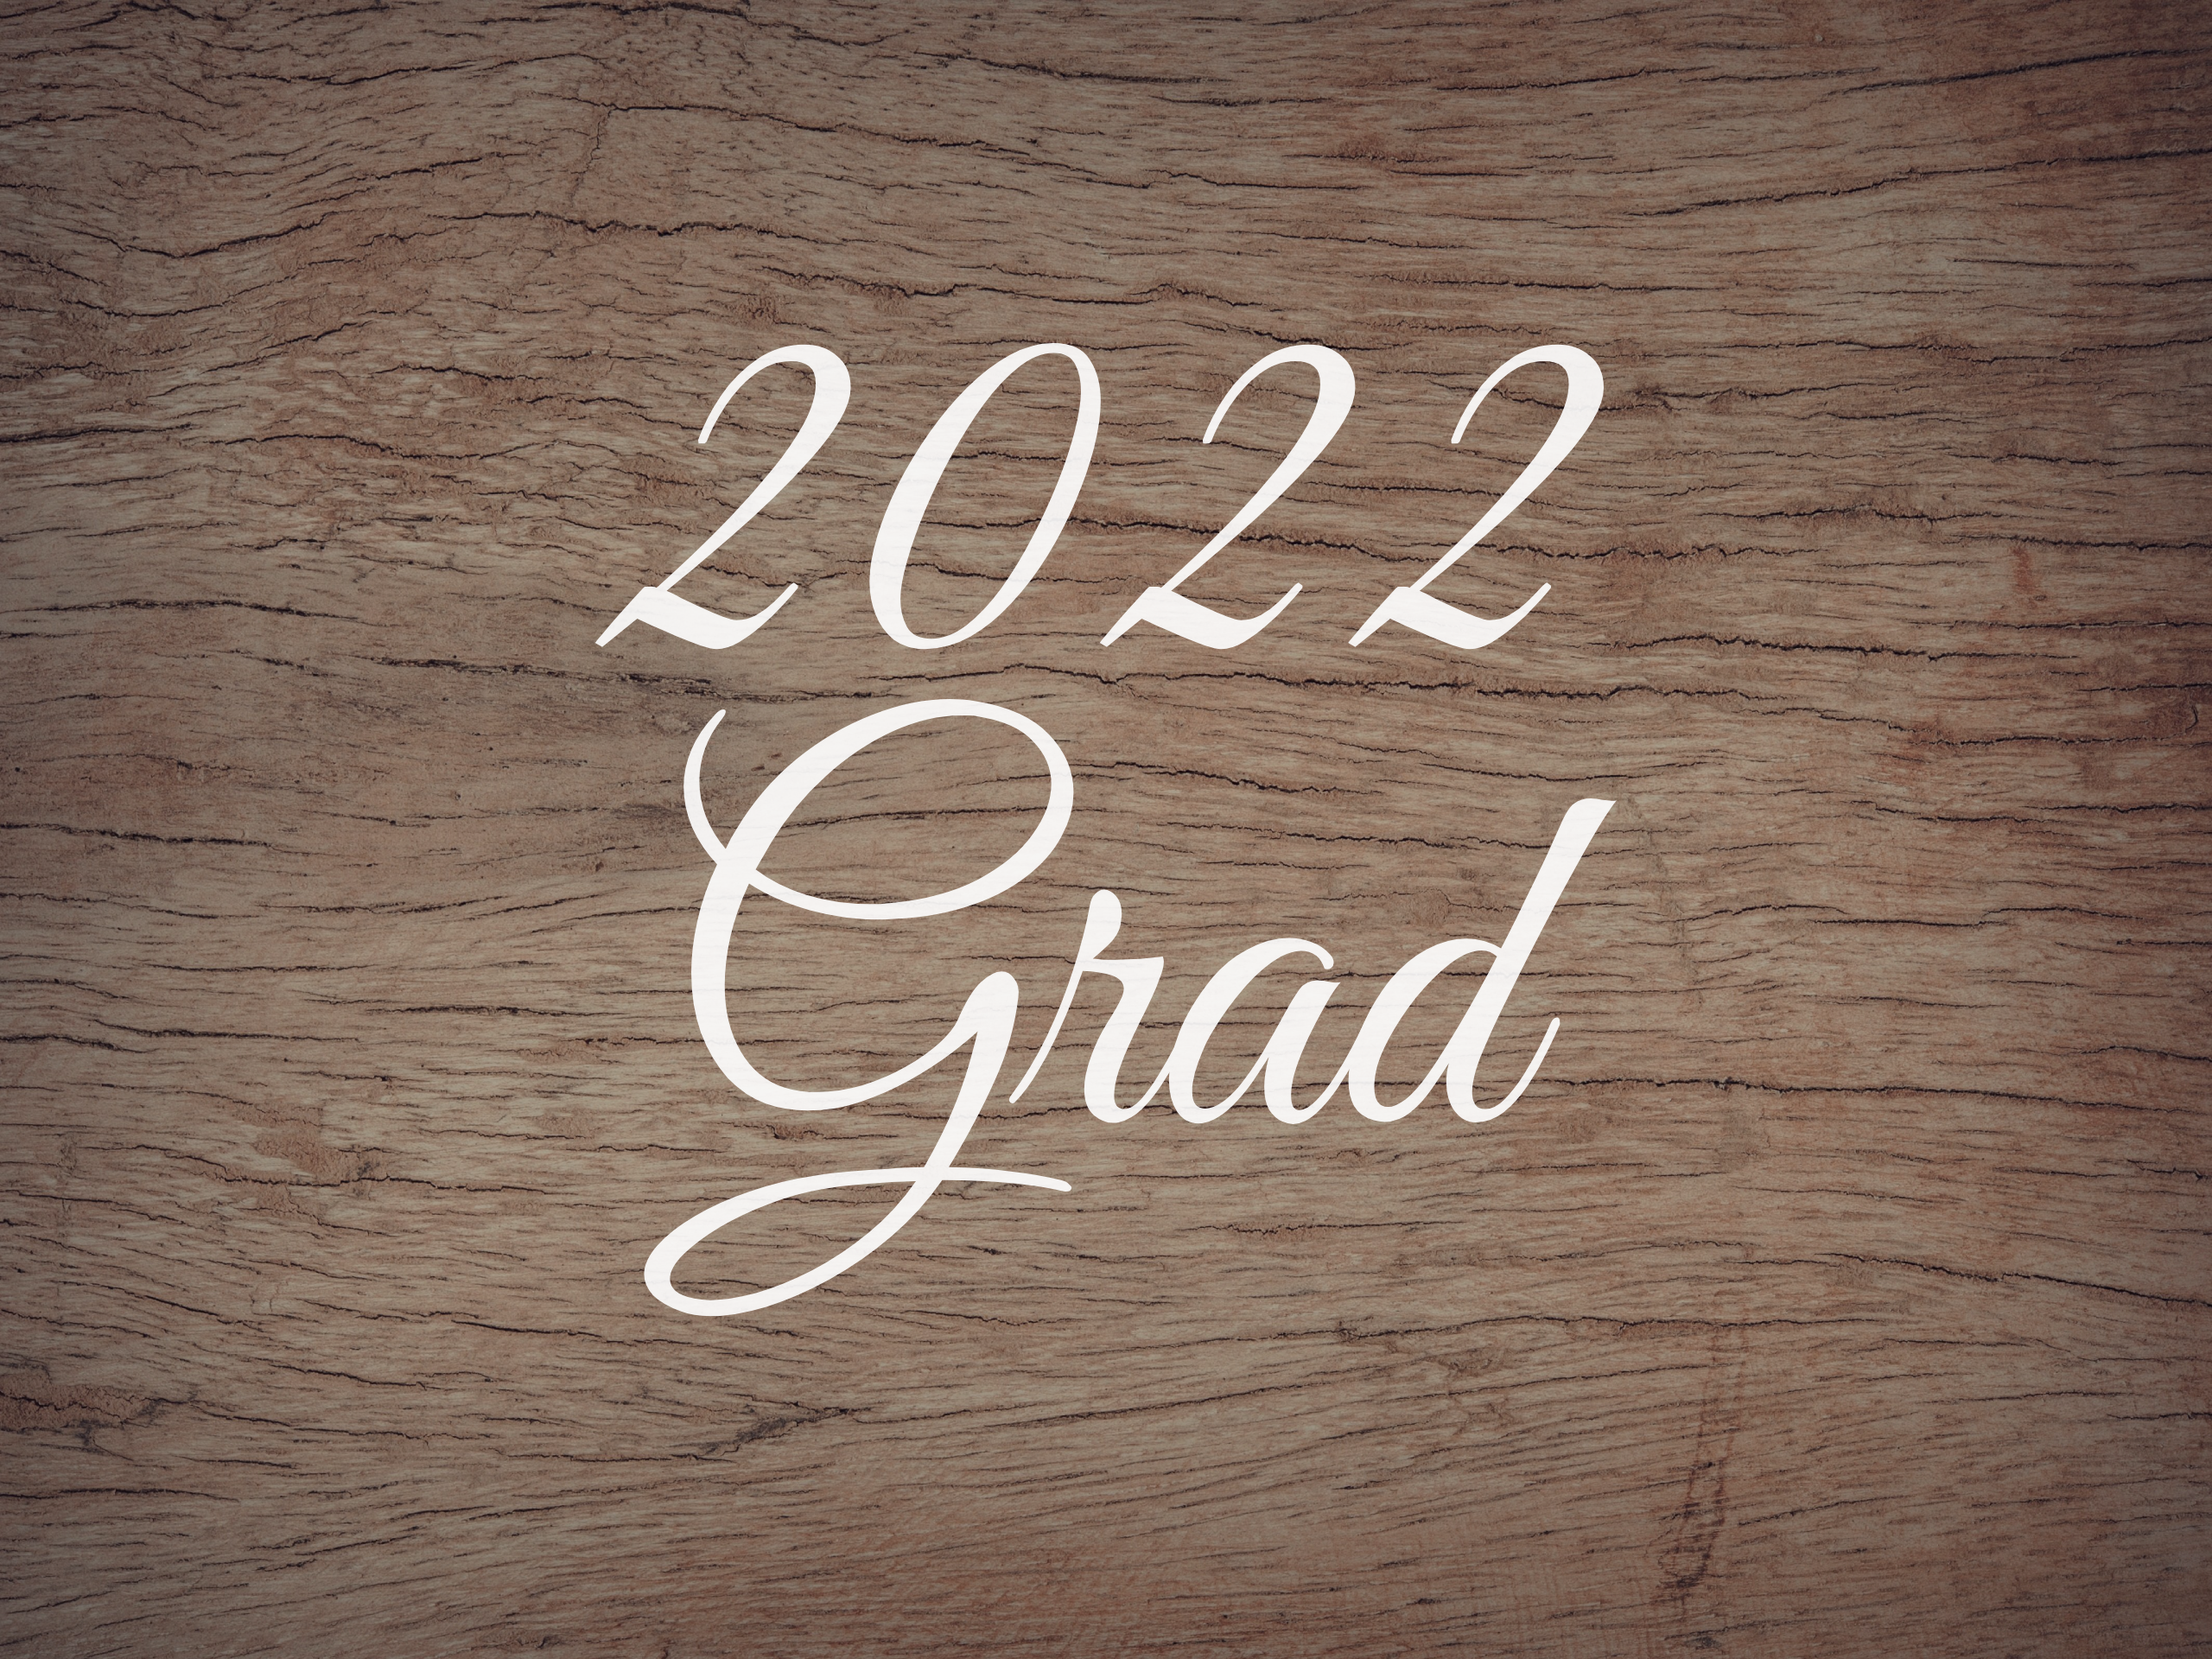 2022 Grad Decal - Holiday Graduation Vinyl Decals for Home, Gifts, Businesses and More! C11